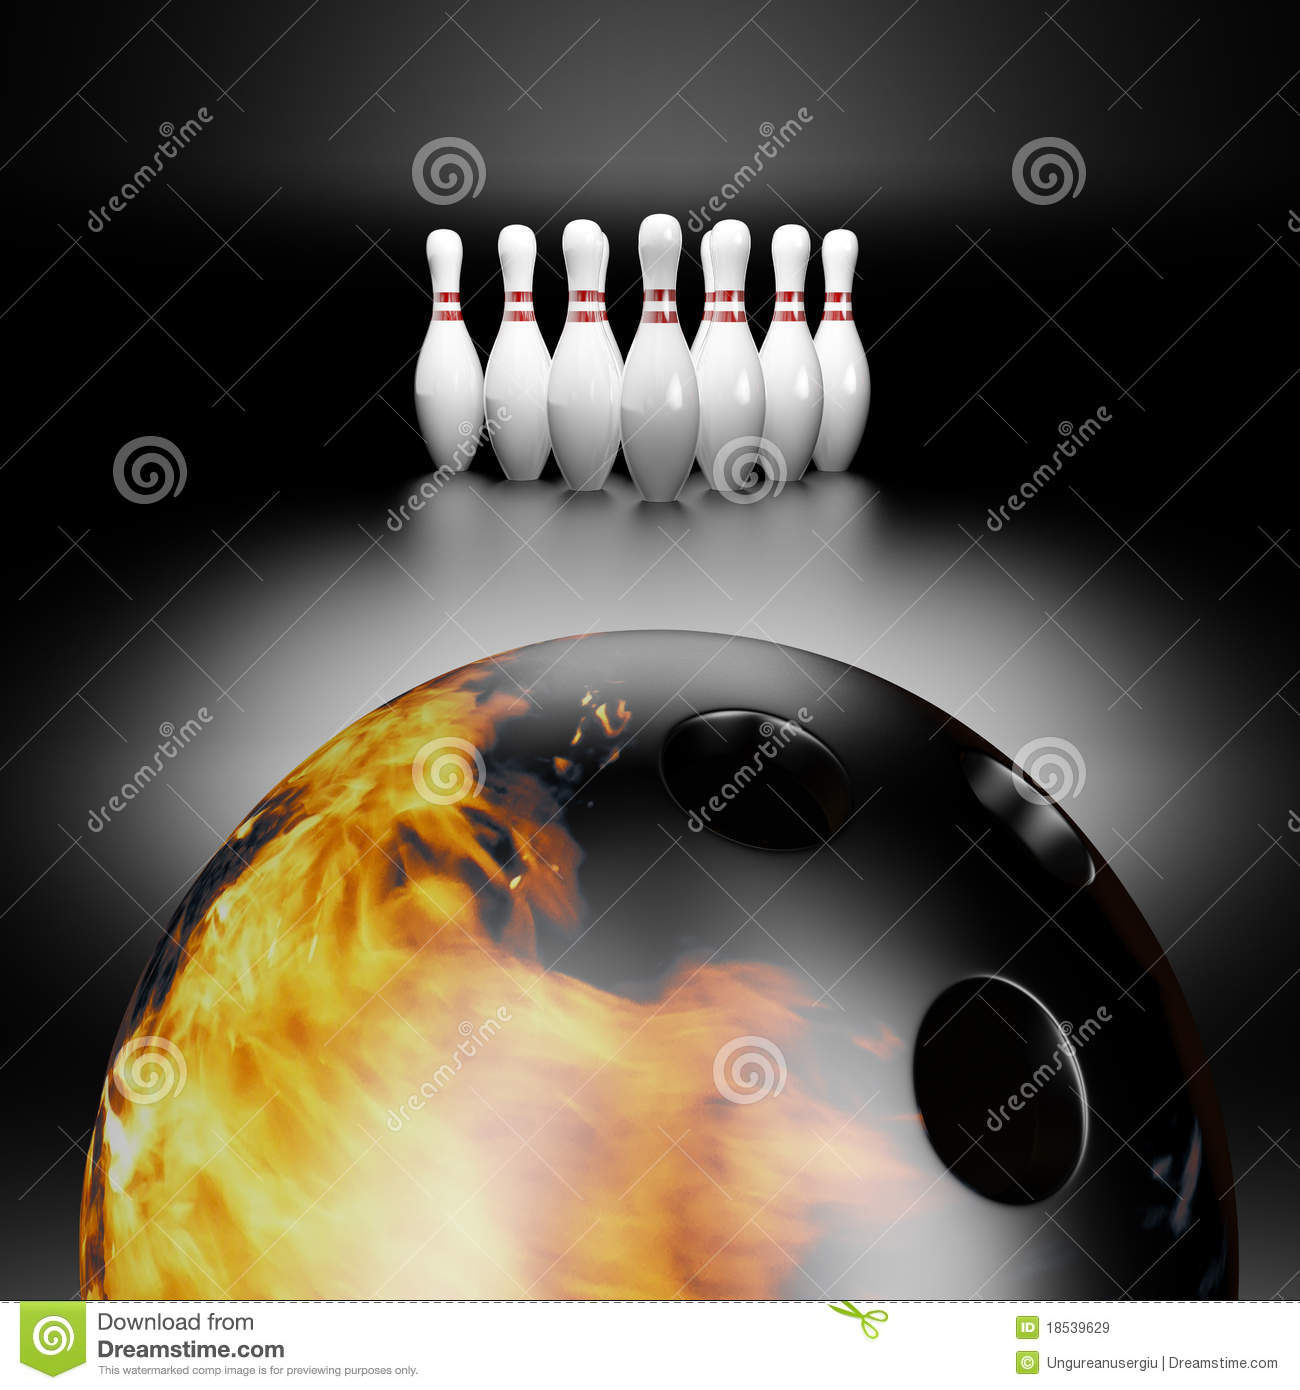 Fire Bowling Ball Royalty Free Stock Images   Image  18539629